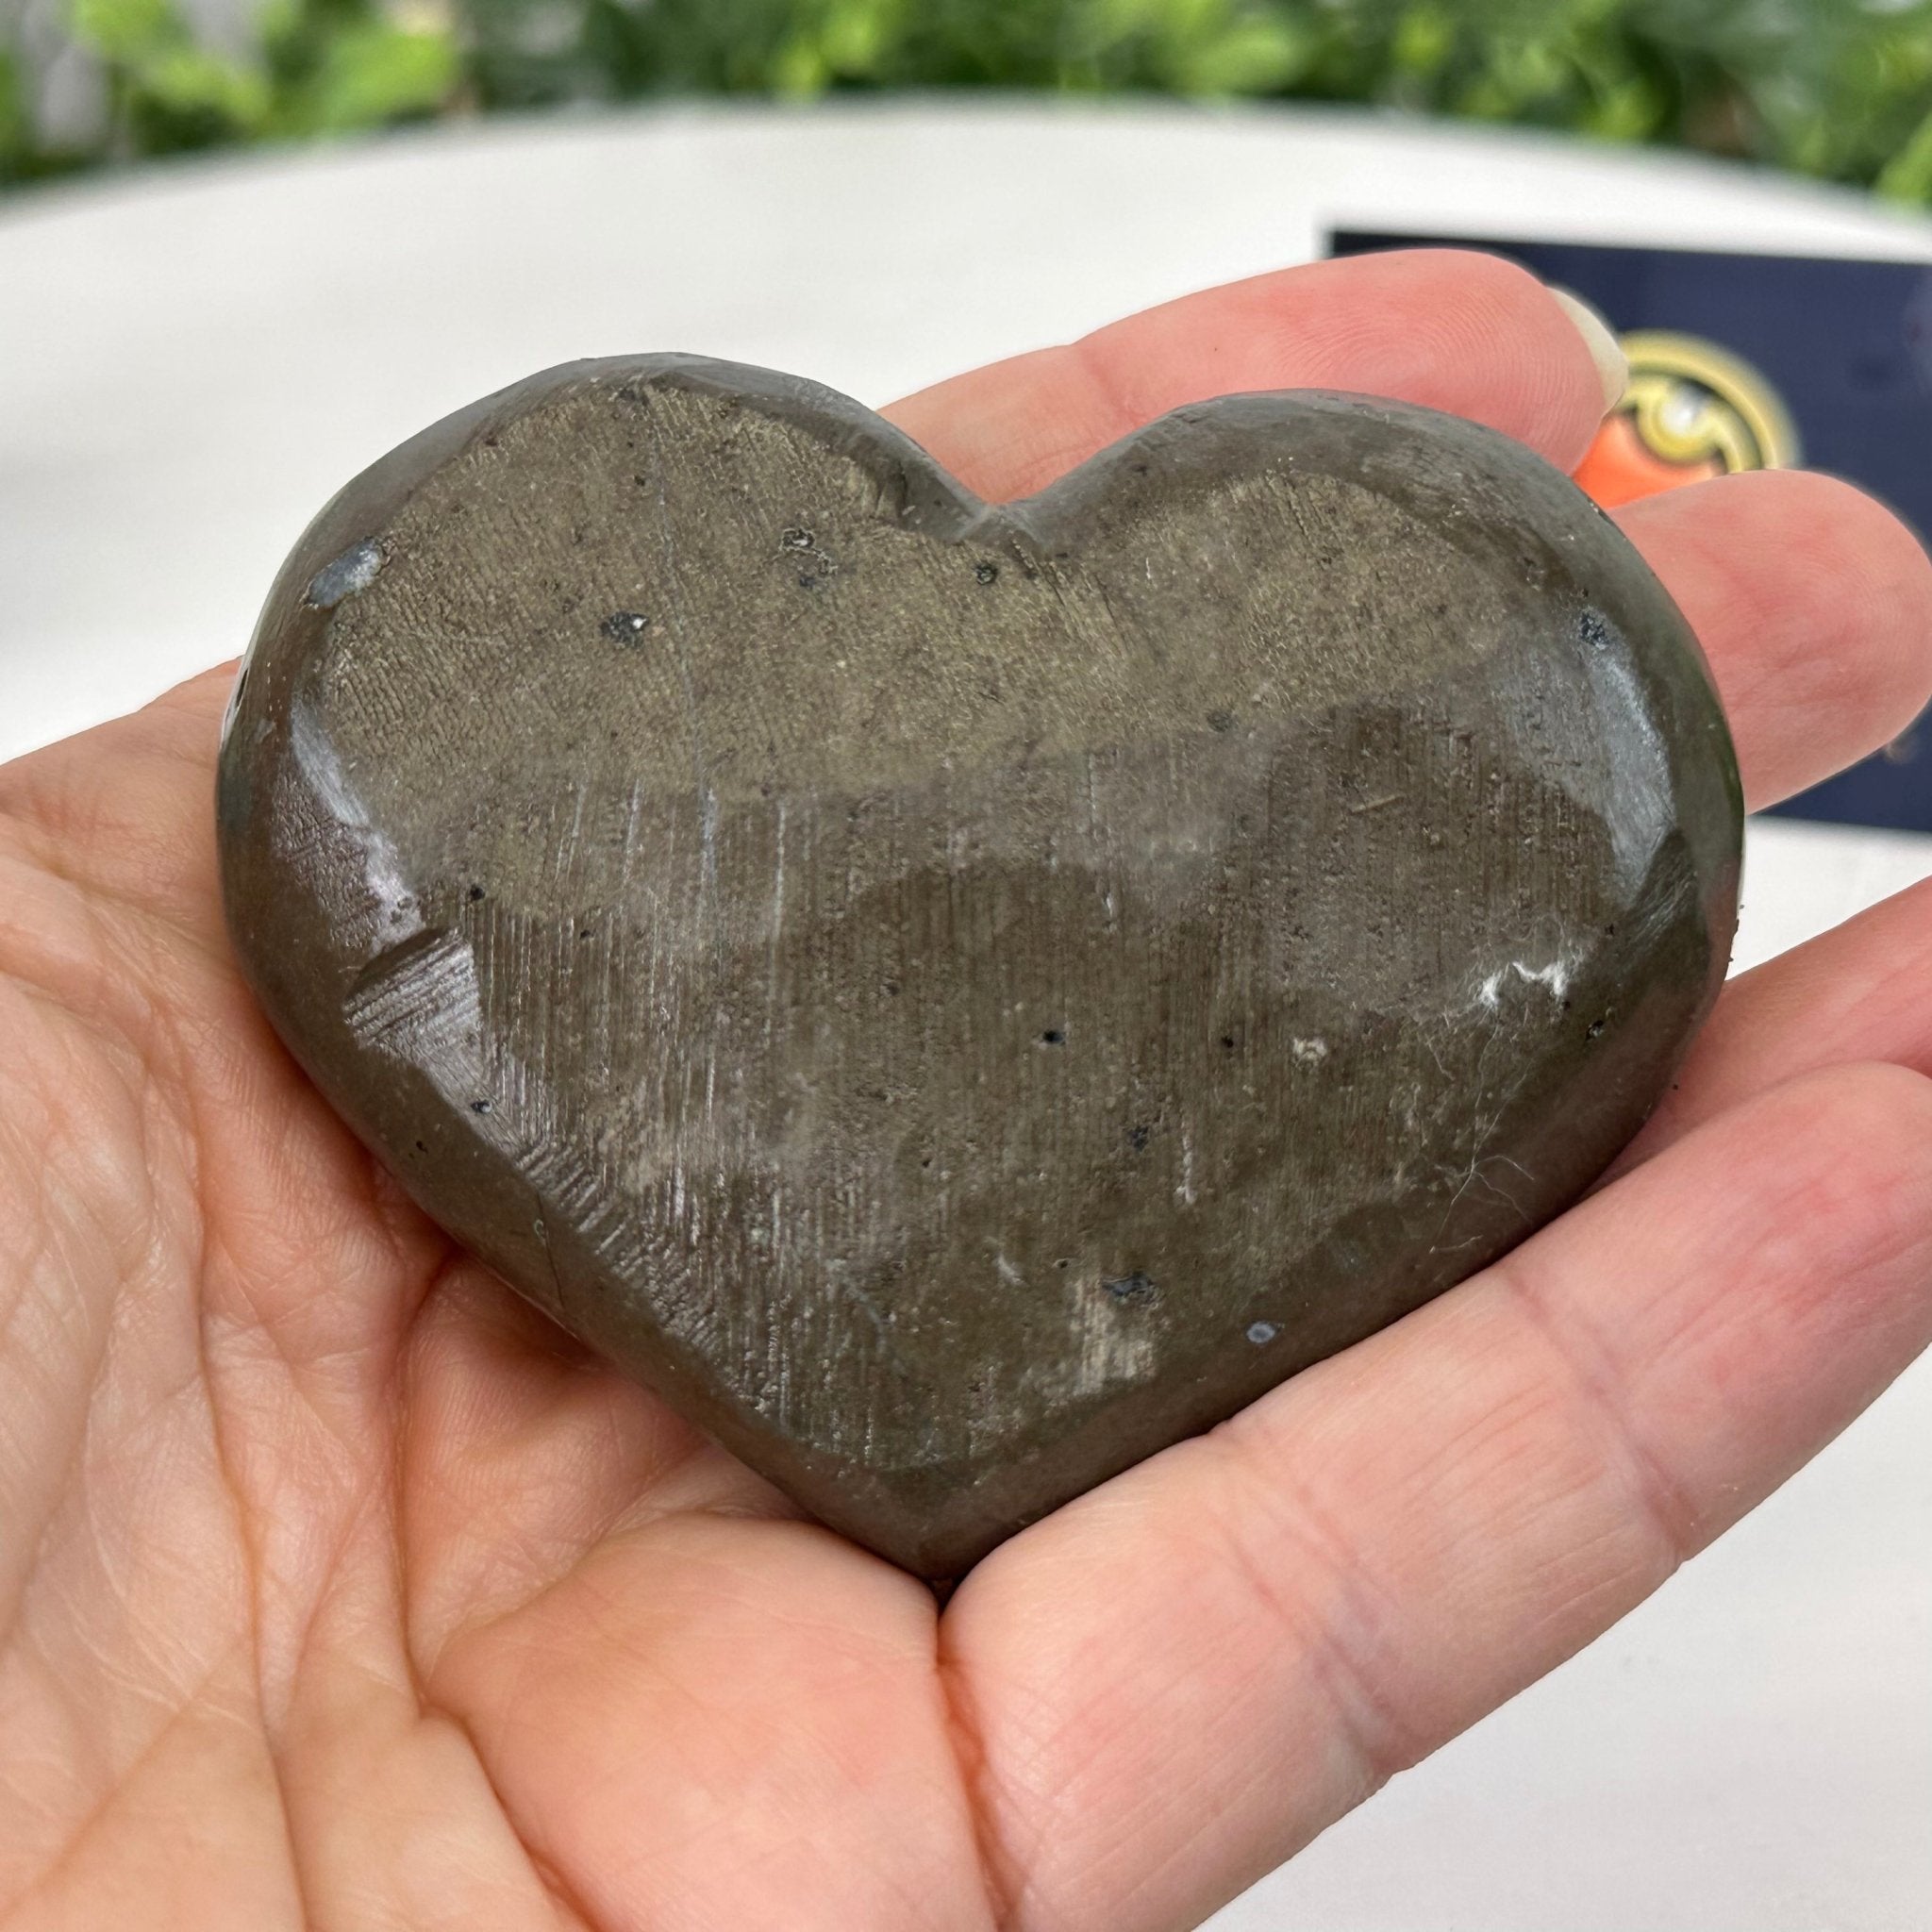 Extra Quality Amethyst Heart Geode on an Acrylic Stand, 0.24 lbs & 2.2" Tall #5462-0022 by Brazil Gems - Brazil GemsBrazil GemsExtra Quality Amethyst Heart Geode on an Acrylic Stand, 0.24 lbs & 2.2" Tall #5462-0022 by Brazil GemsHearts5462-0022